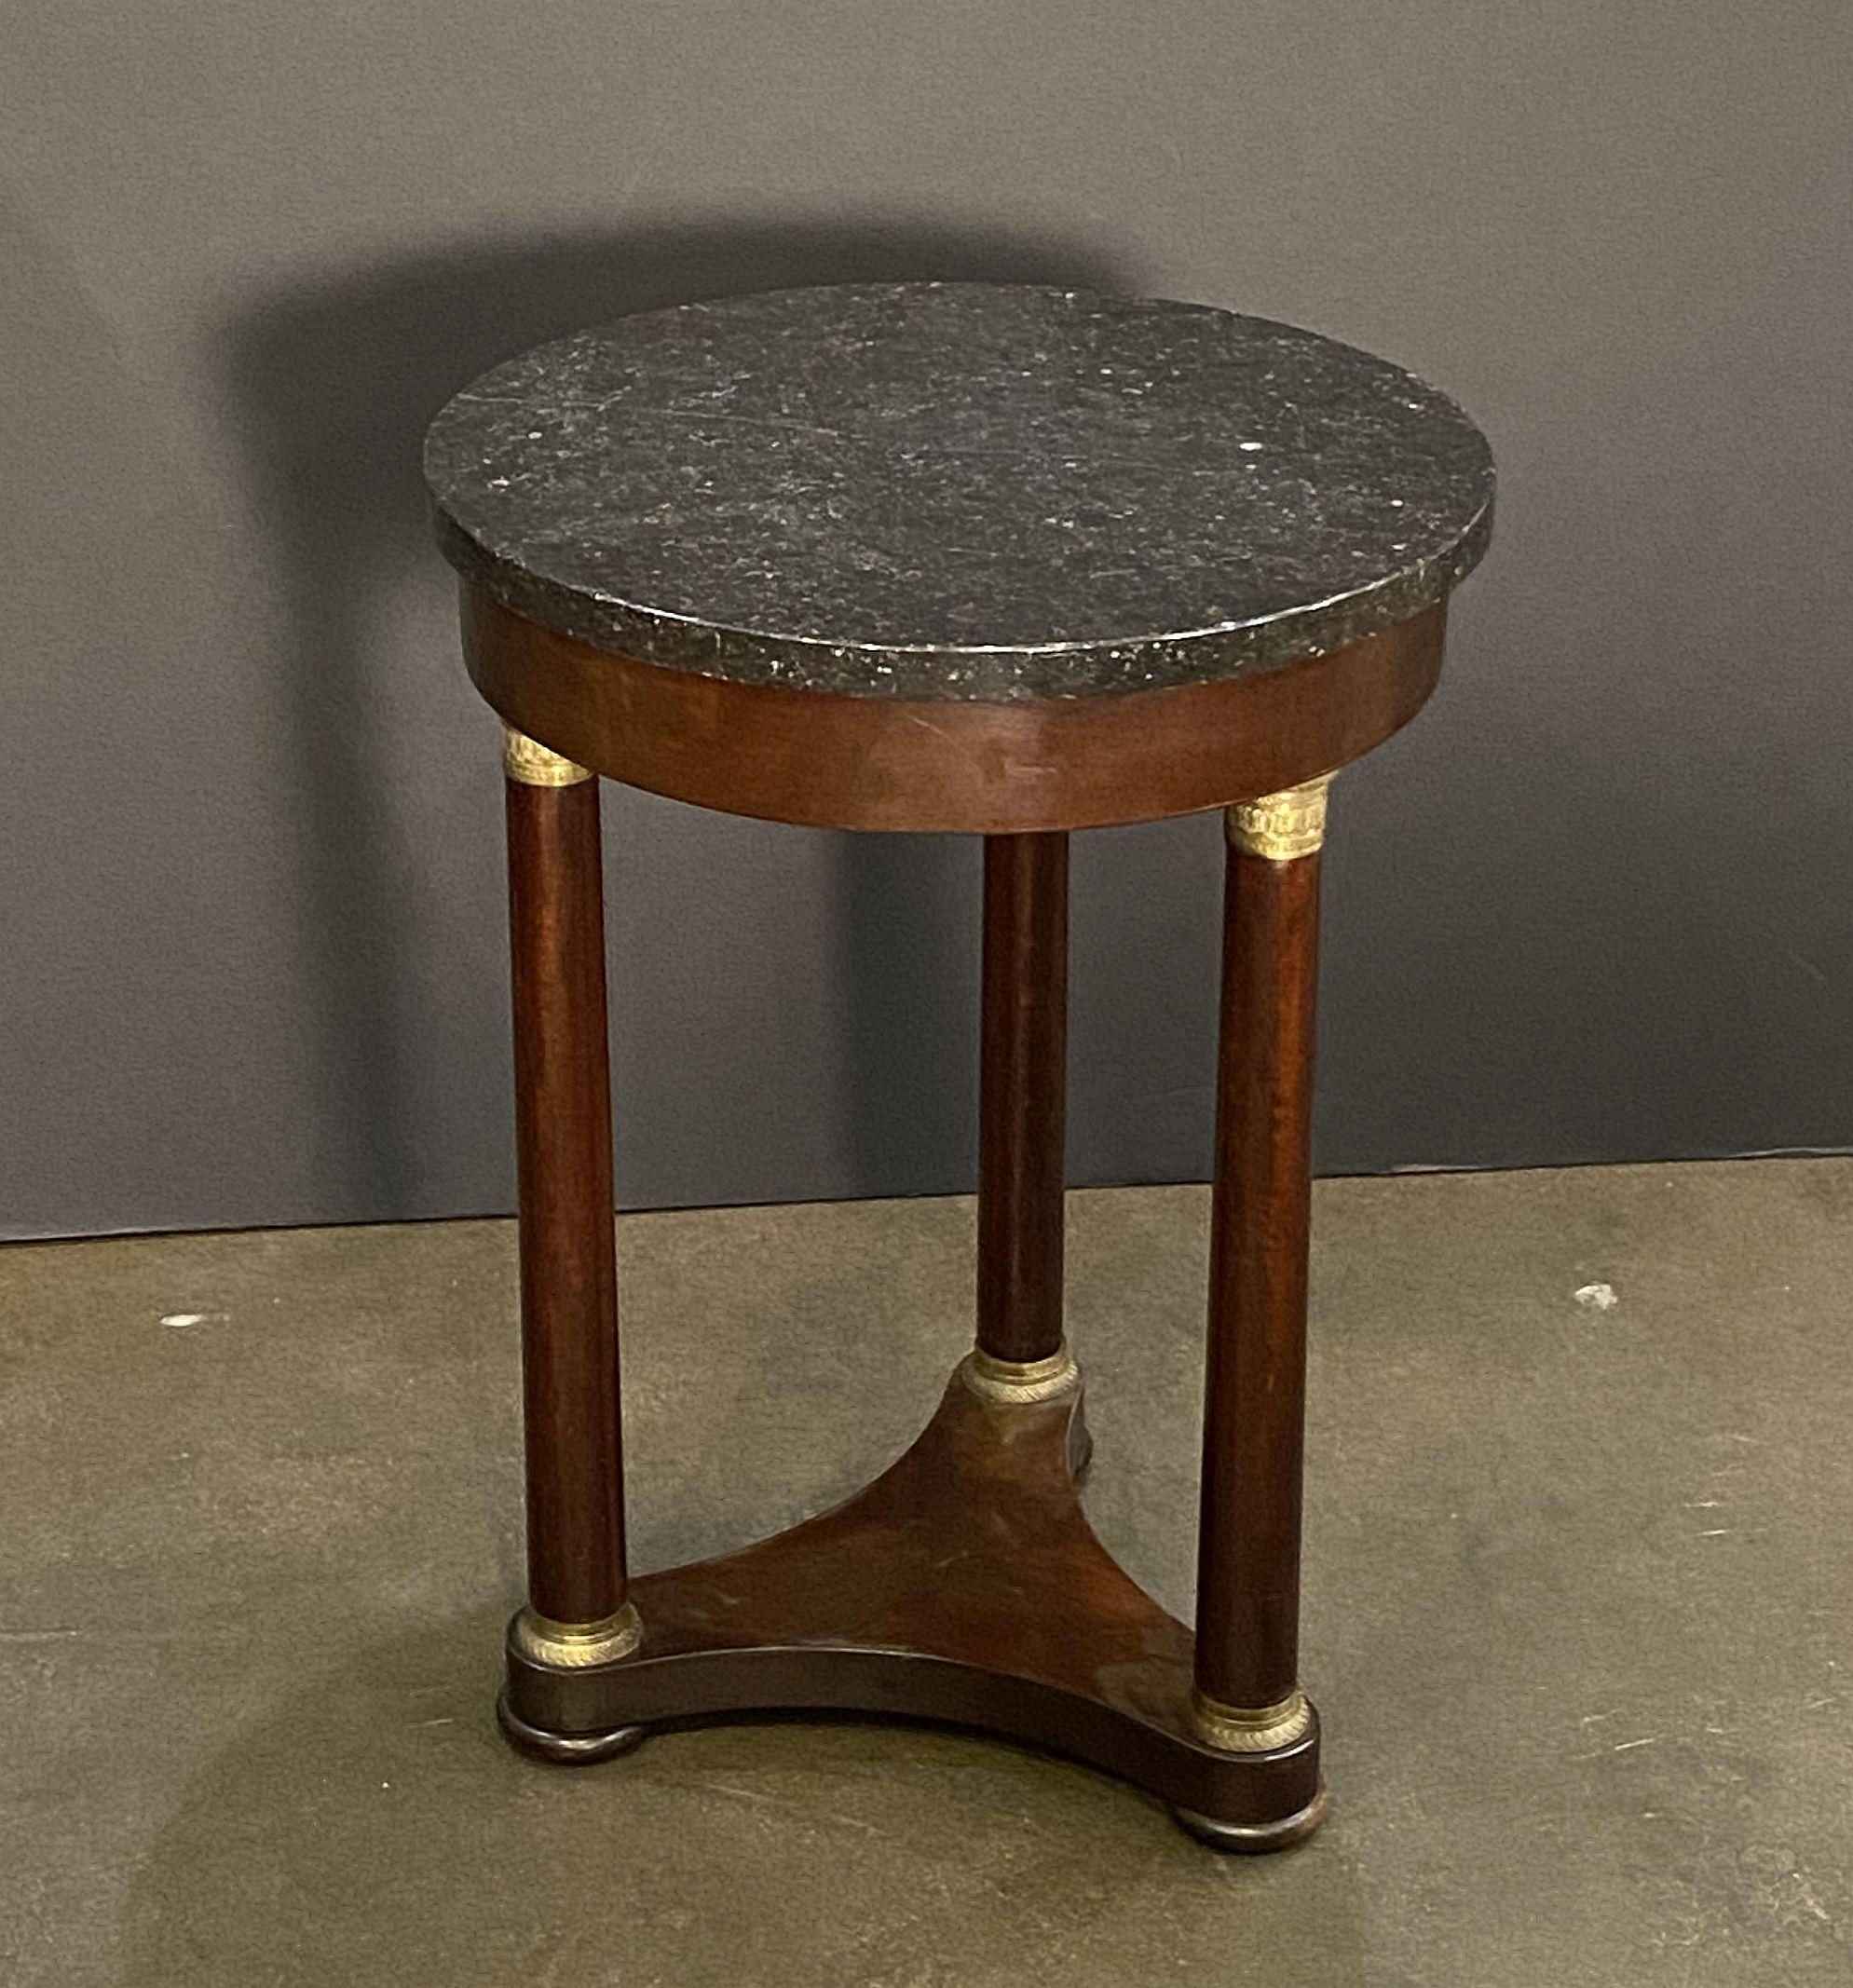 French Marble-Top Gueridon Table or Guéridon in the Empire Style For Sale 8